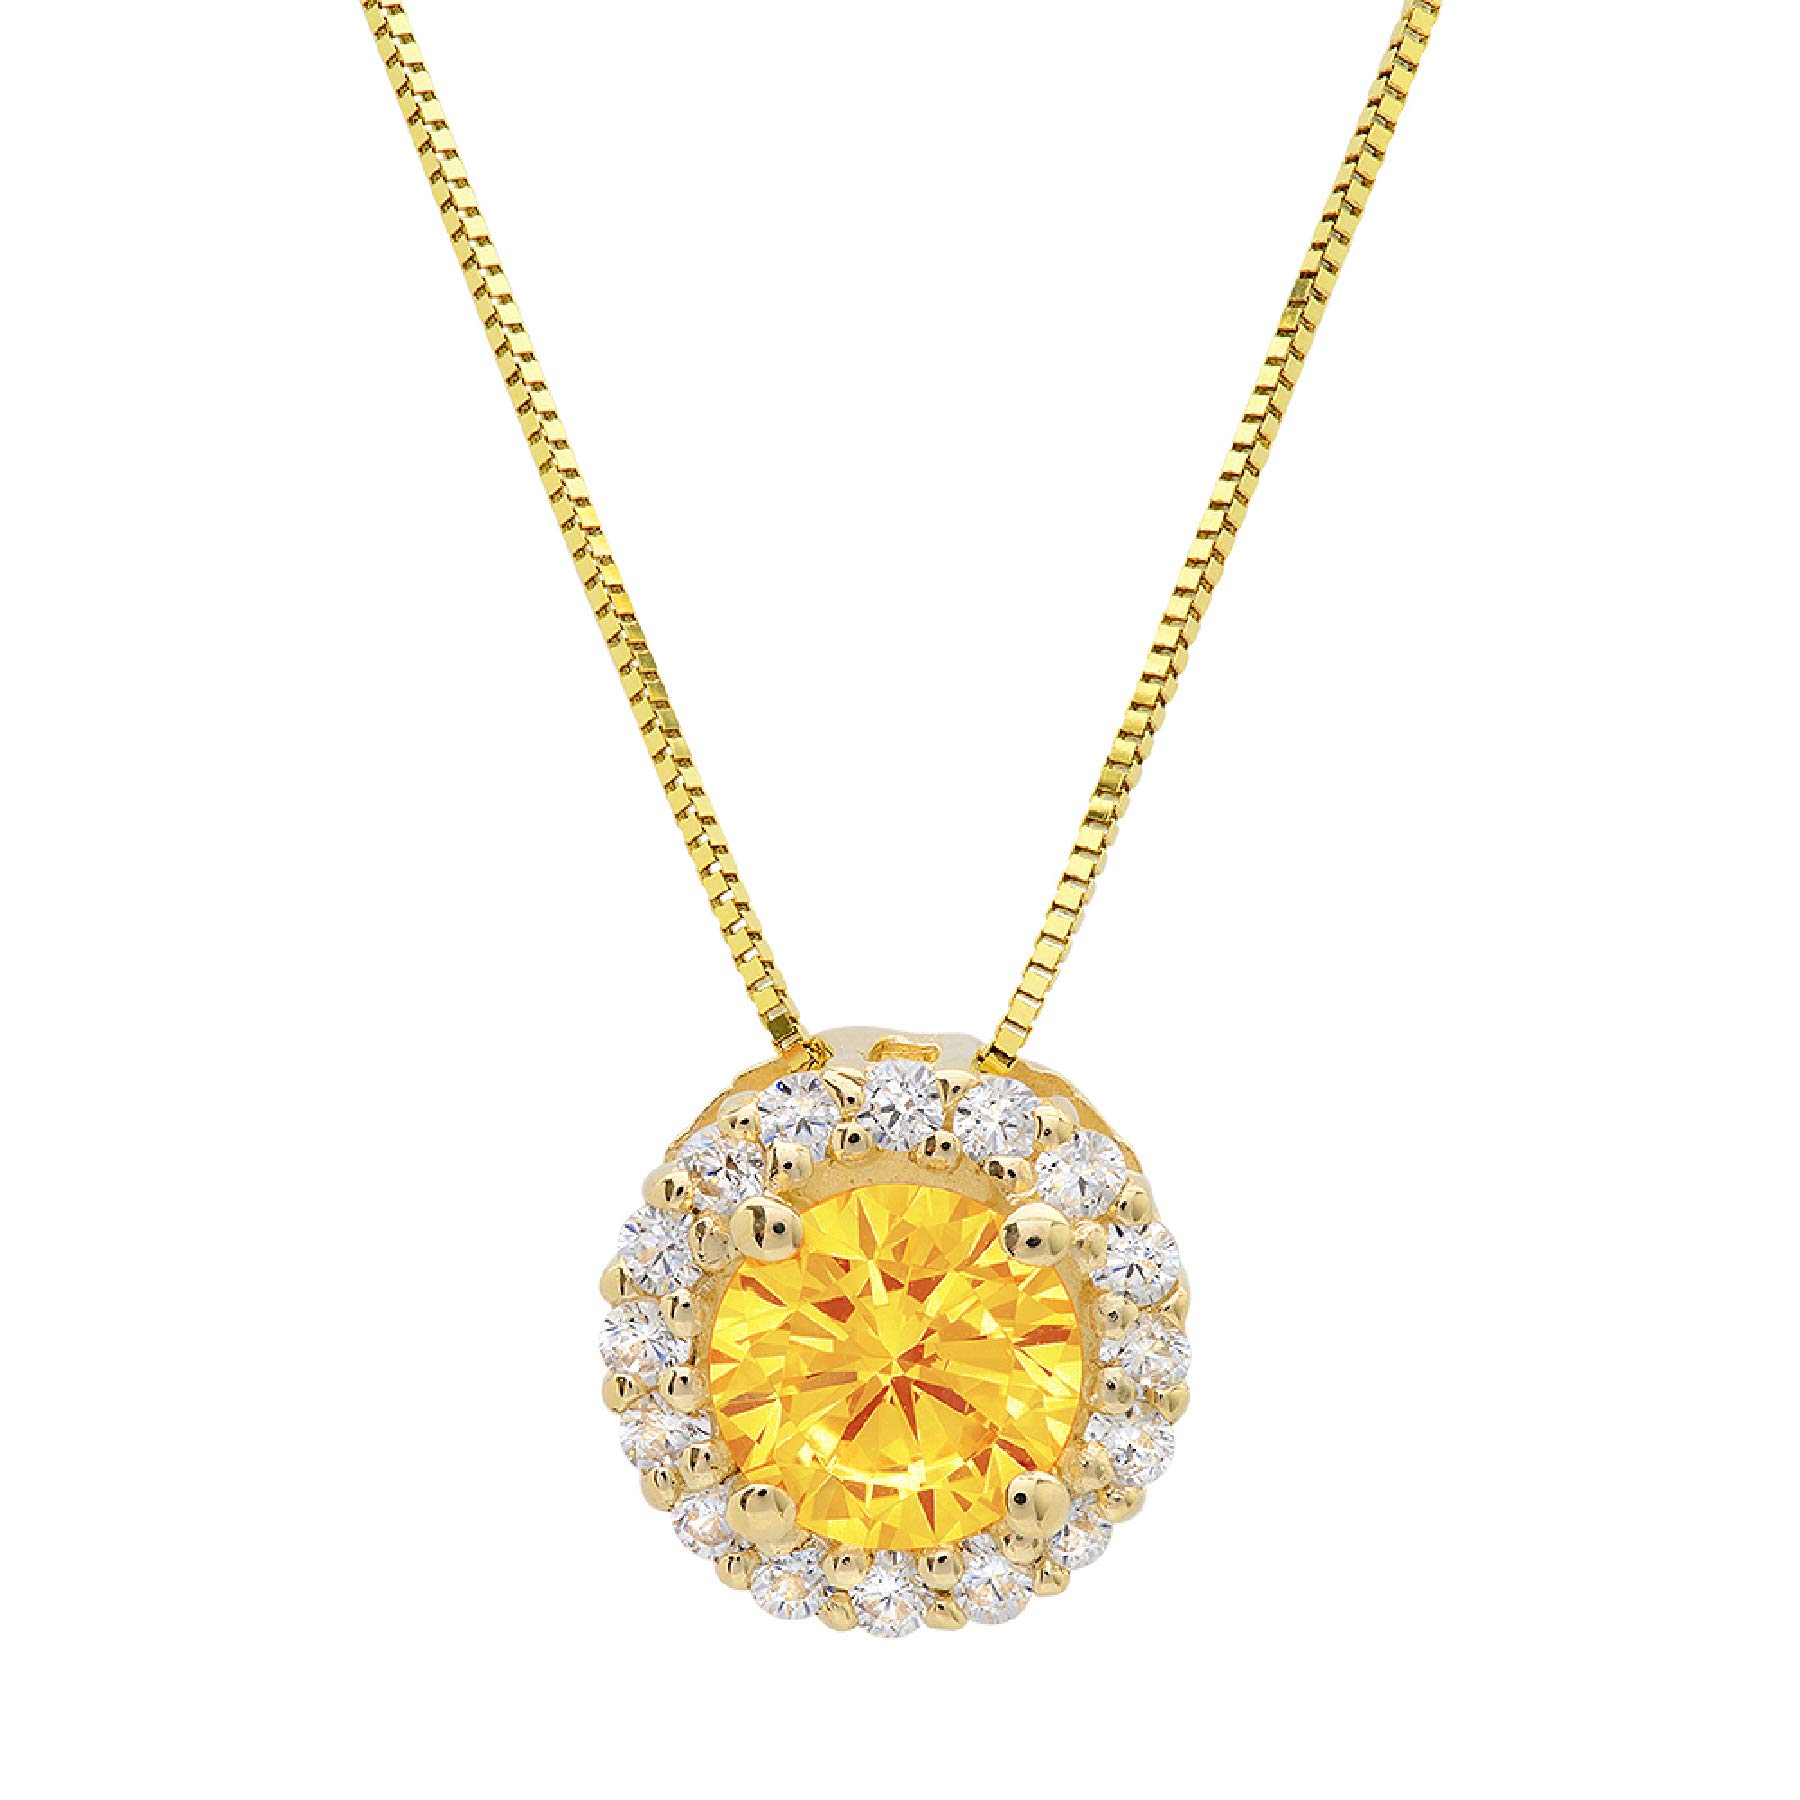 Clara Pucci 1.30 ct Brilliant Round Cut Pave Halo Stunning Genuine Flawless Natural Yellow Citrine Gemstone Solitaire Pendant Necklace With 16